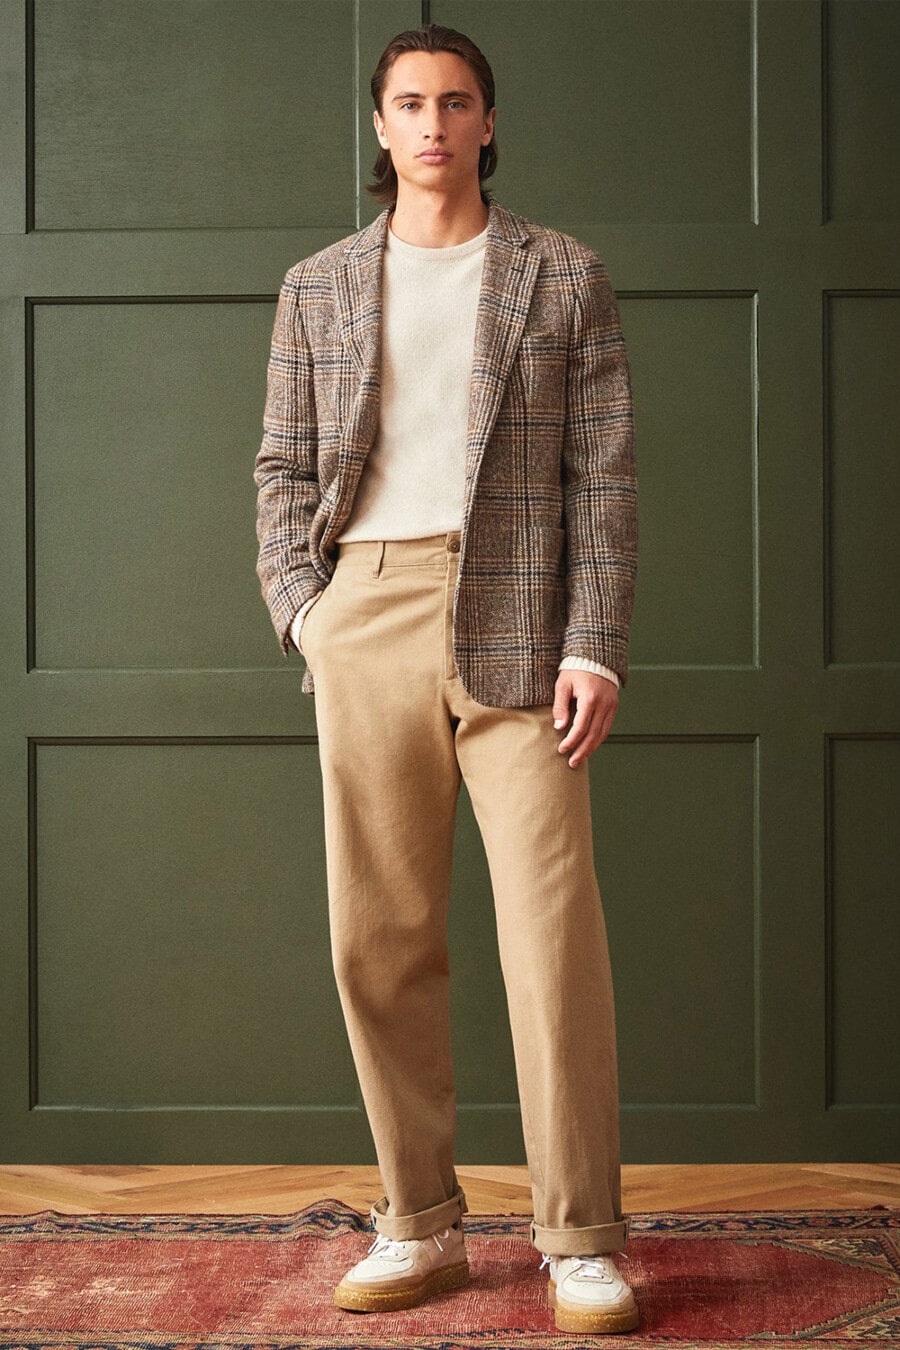 Men's wide-leg khaki chinos, off-white crew neck sweater, brown tweed check blazer and white gum sole sneakers outfit